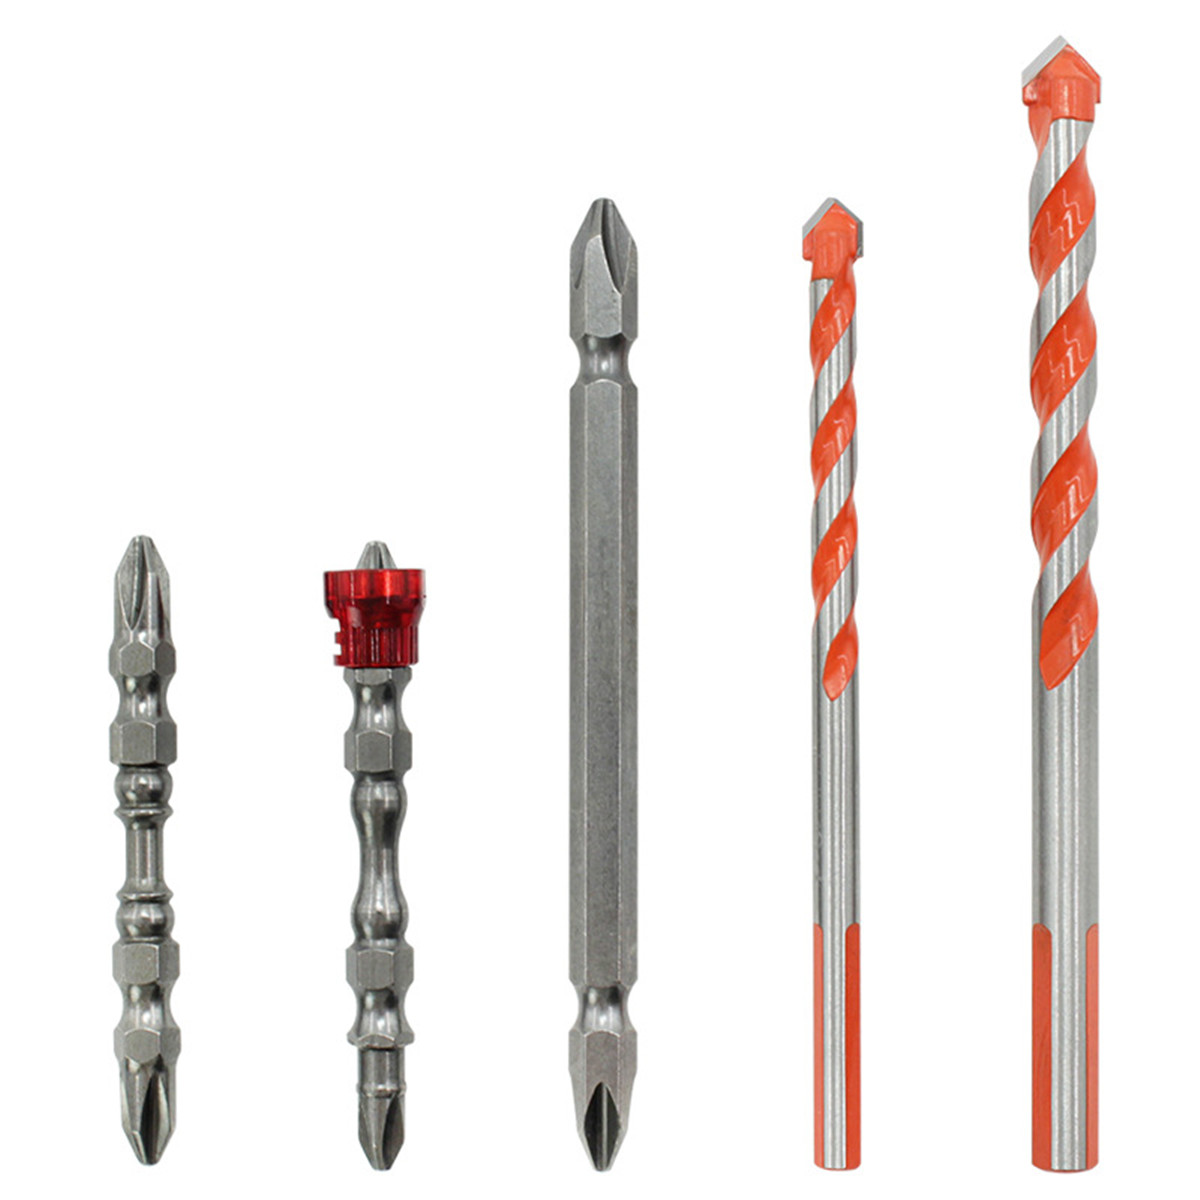 5Pcs-Tile-Glass-Drill-Set-Magnetic-Ring-Cross-Screwdriver-Bit-Multifunctional-Cutter-Marble-1602044-1